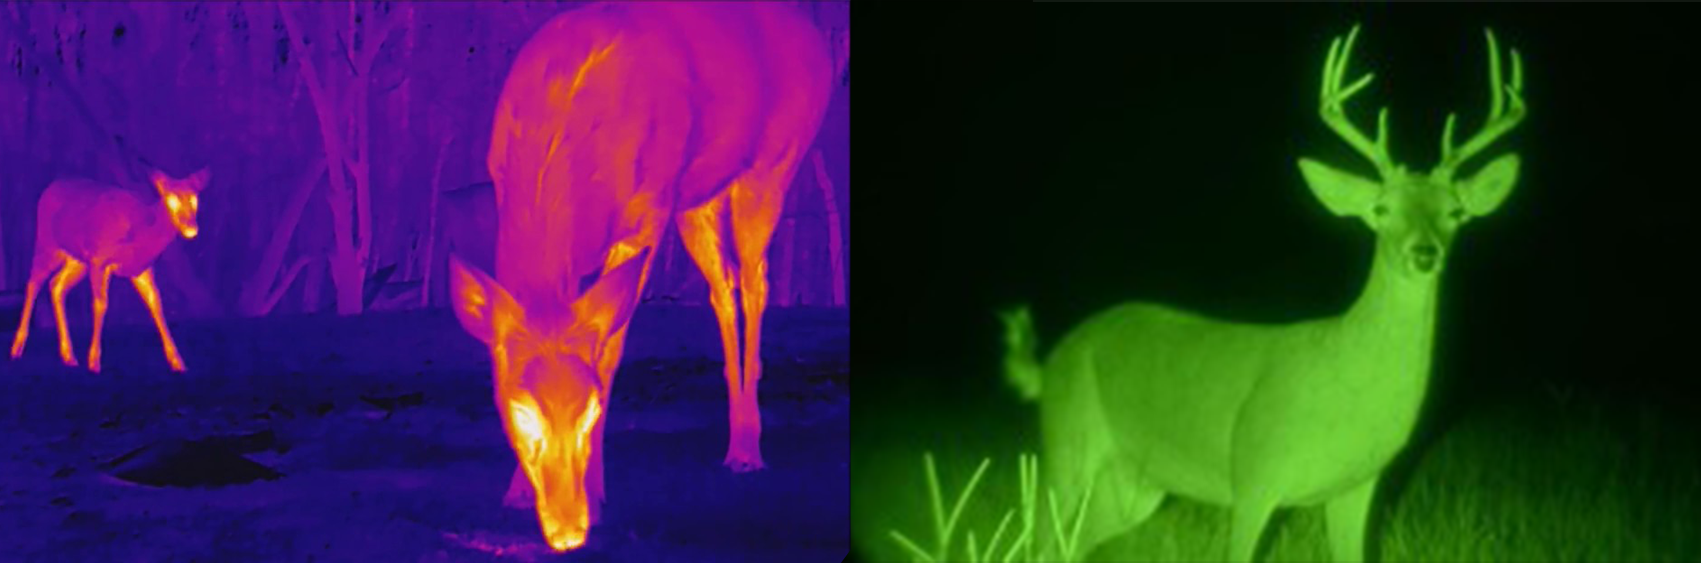 What's The Difference between Thermal Imaging and Night Vision?